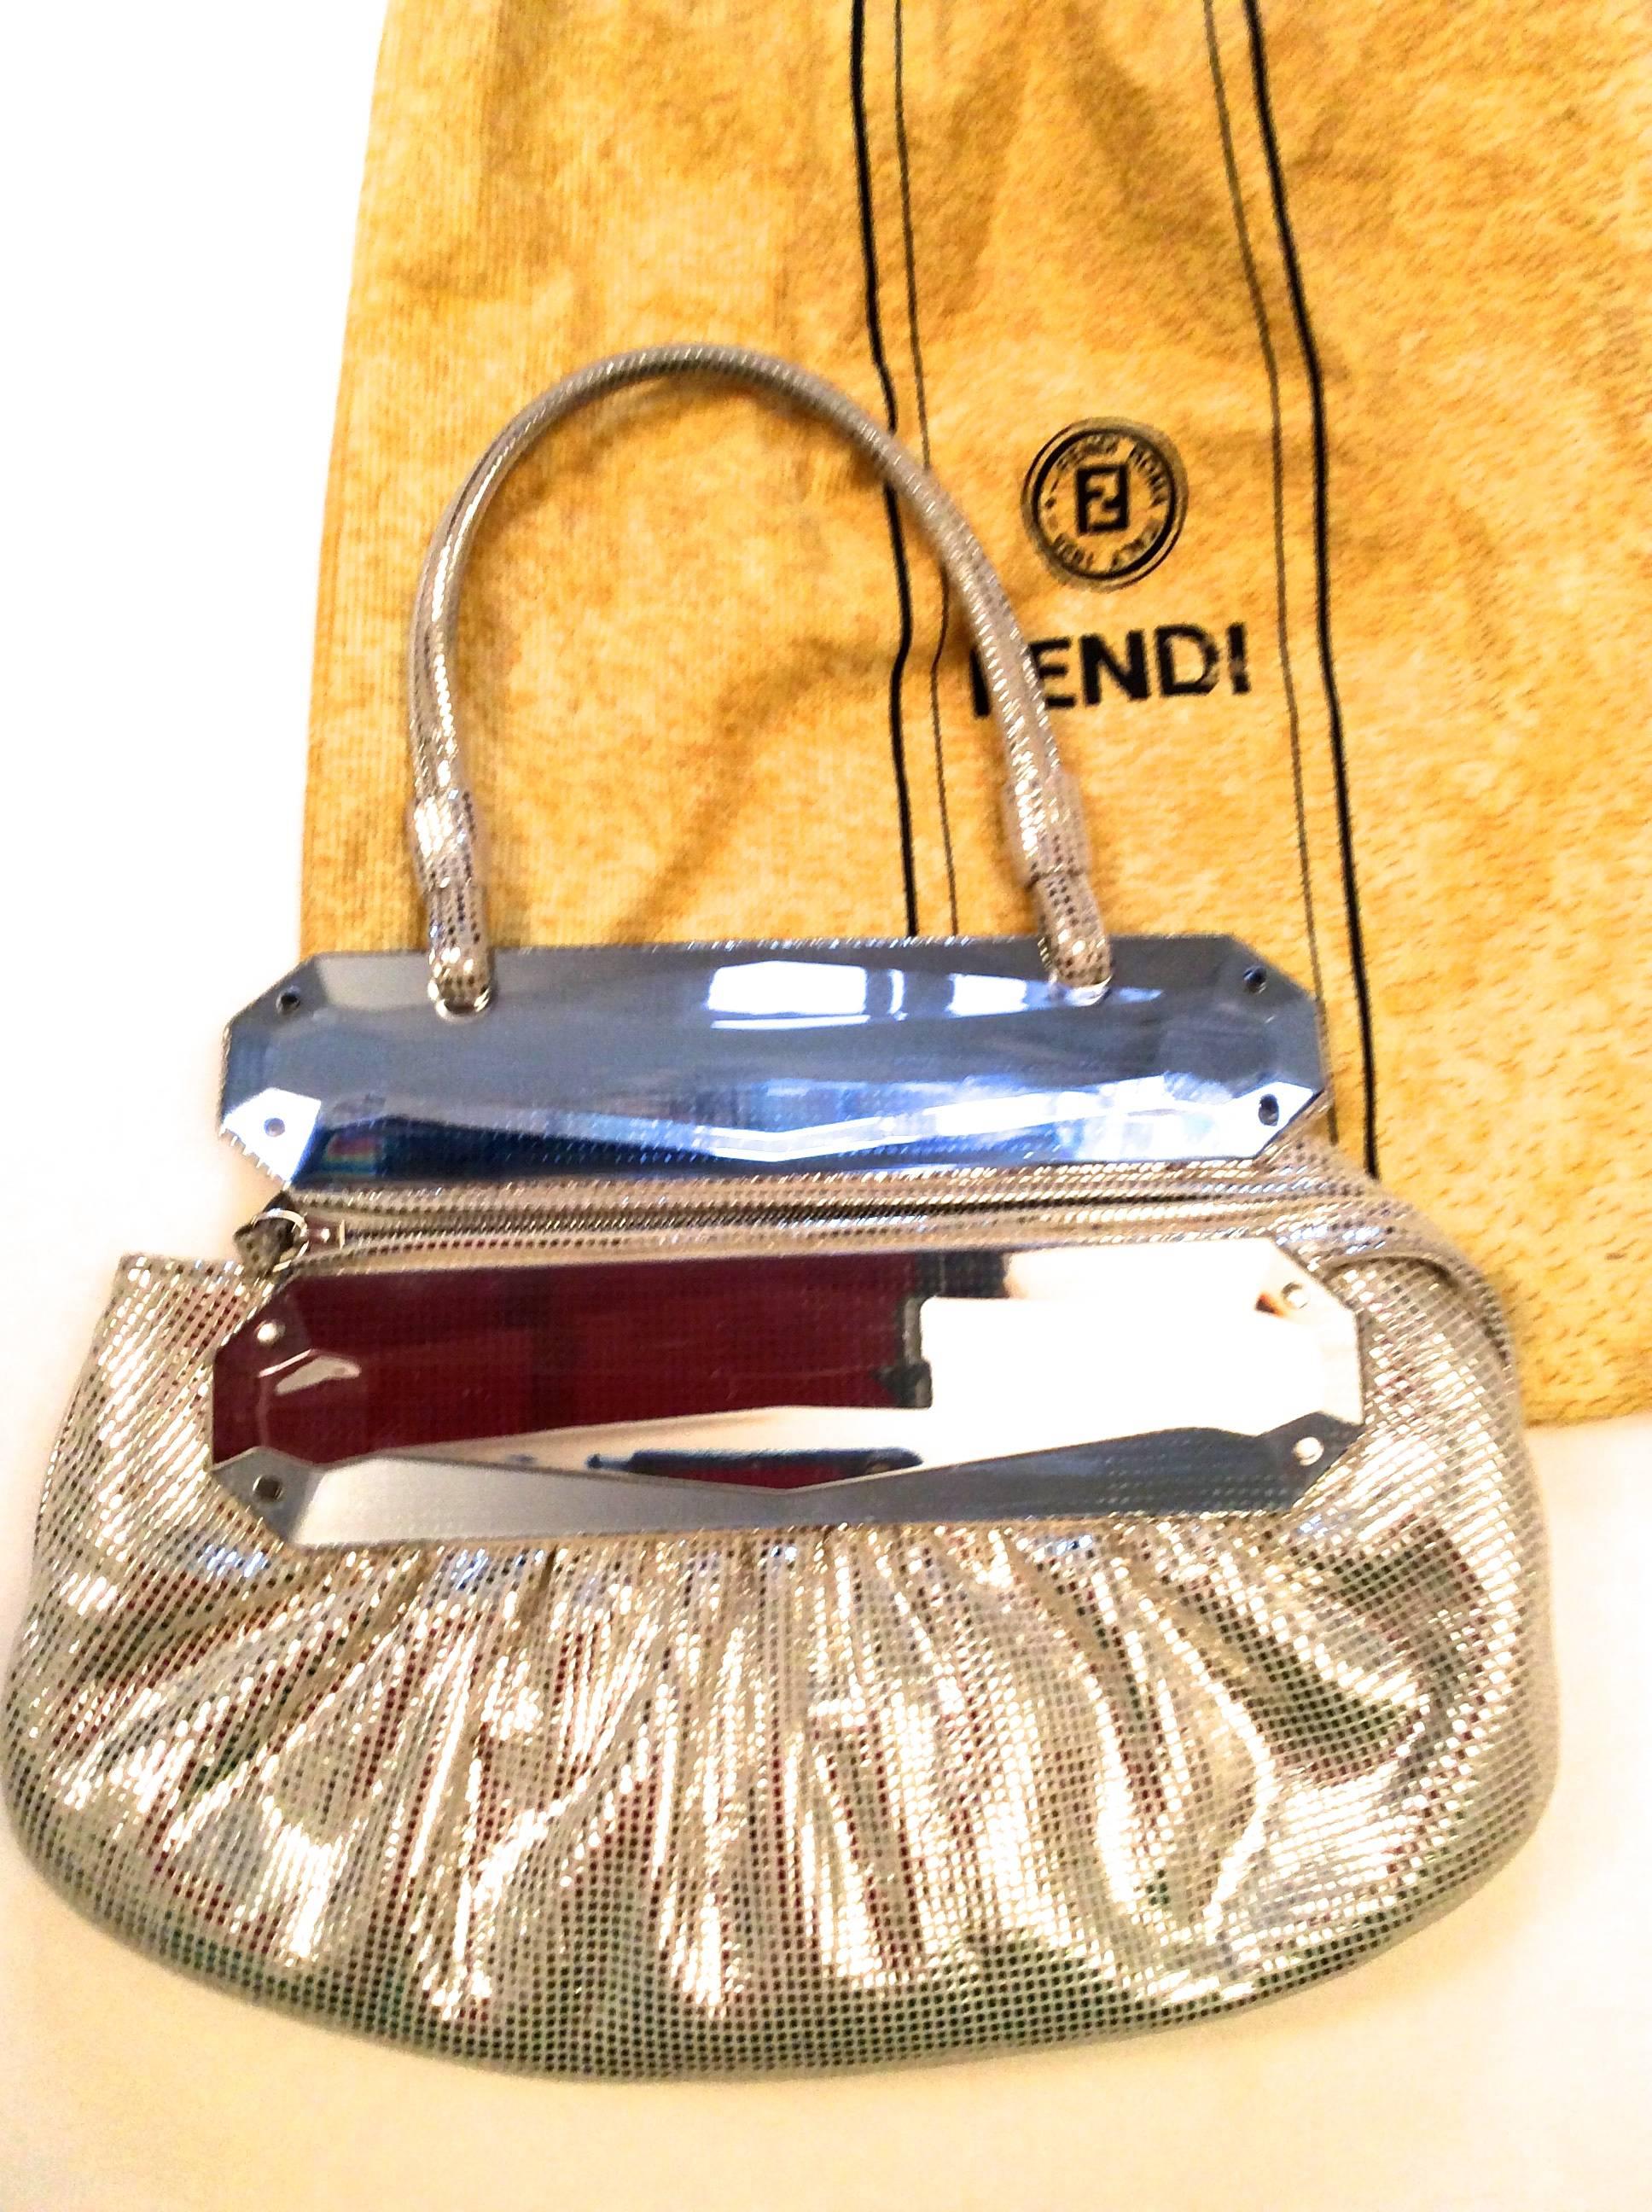 You are looking at a beautiful Fendi evening bag which measures 8.5 inches high and 11 inches wide. The front of the bag has a zipper enclosure which is 9 inches and a leather tab that snaps on the back. The drop of the strap is 13.5 inches. It is